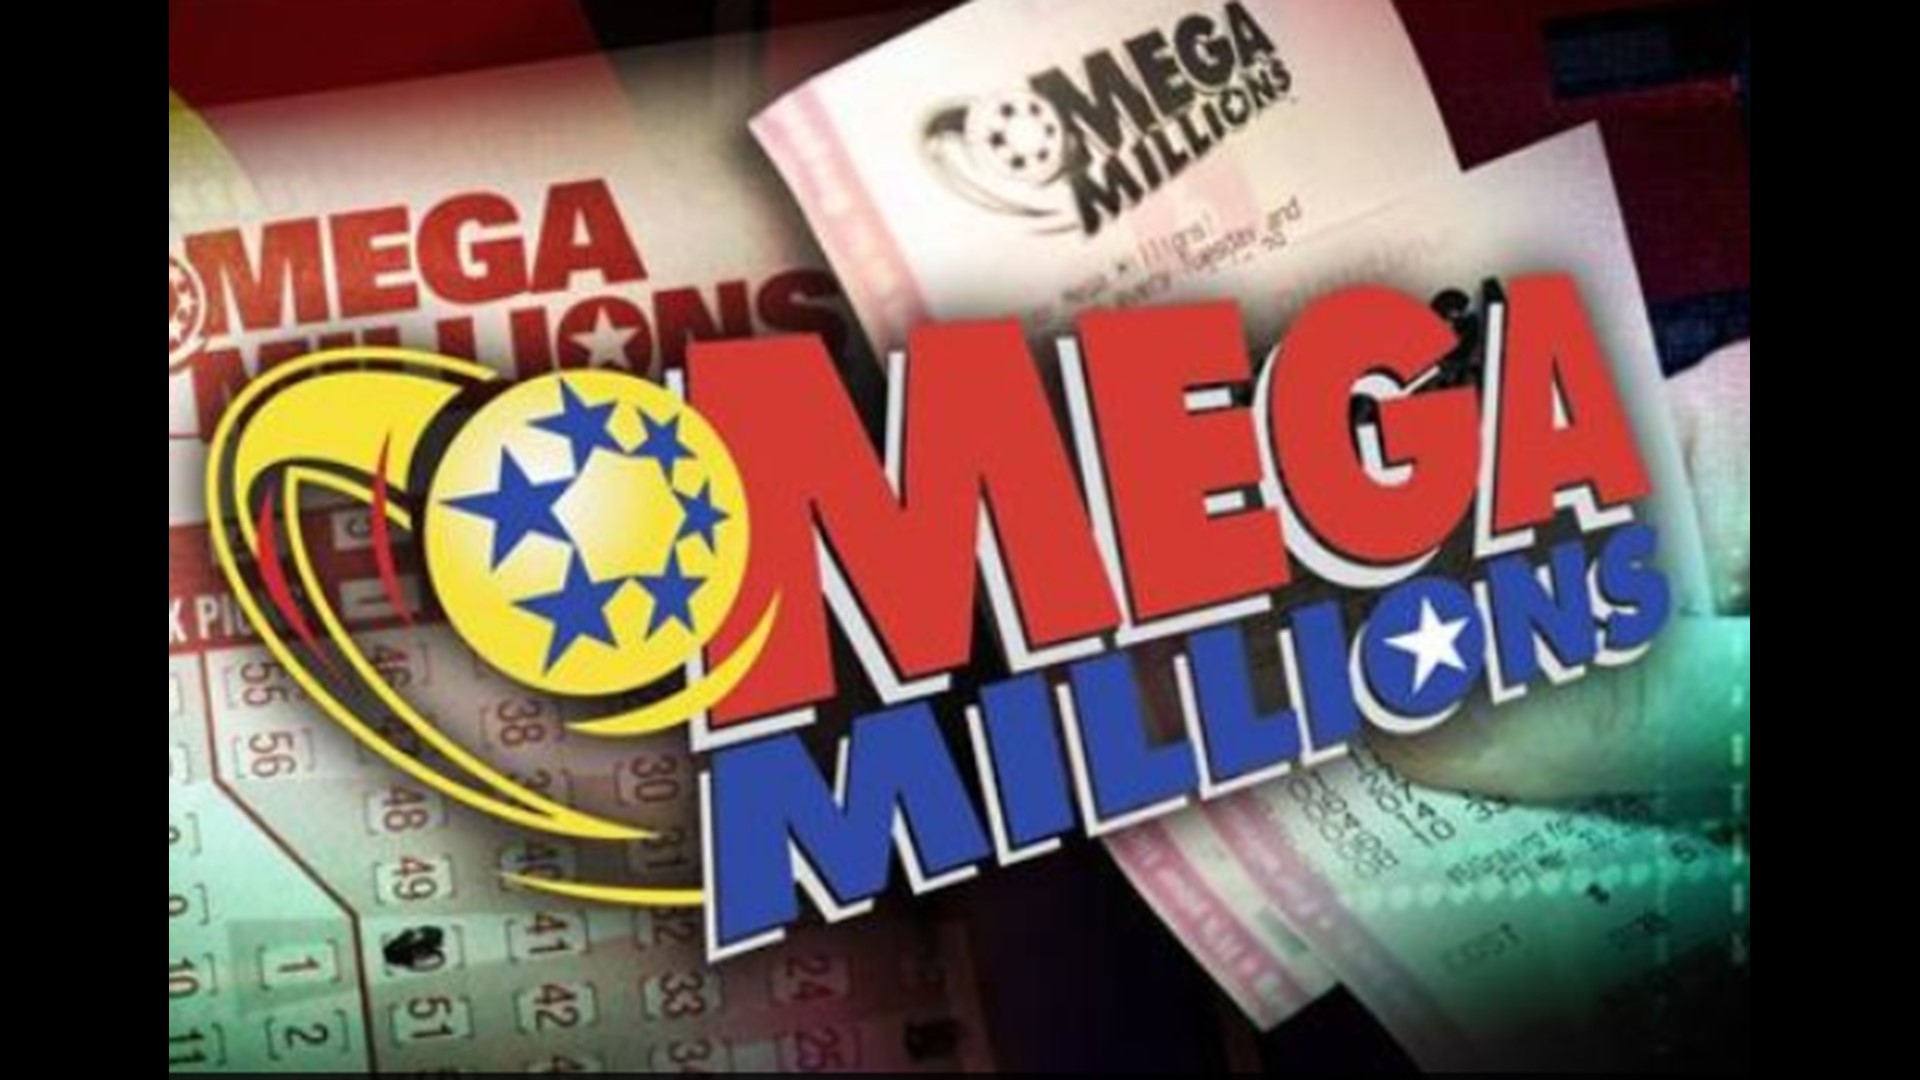 Winning Mega Millions numbers for Friday March 11, 2016